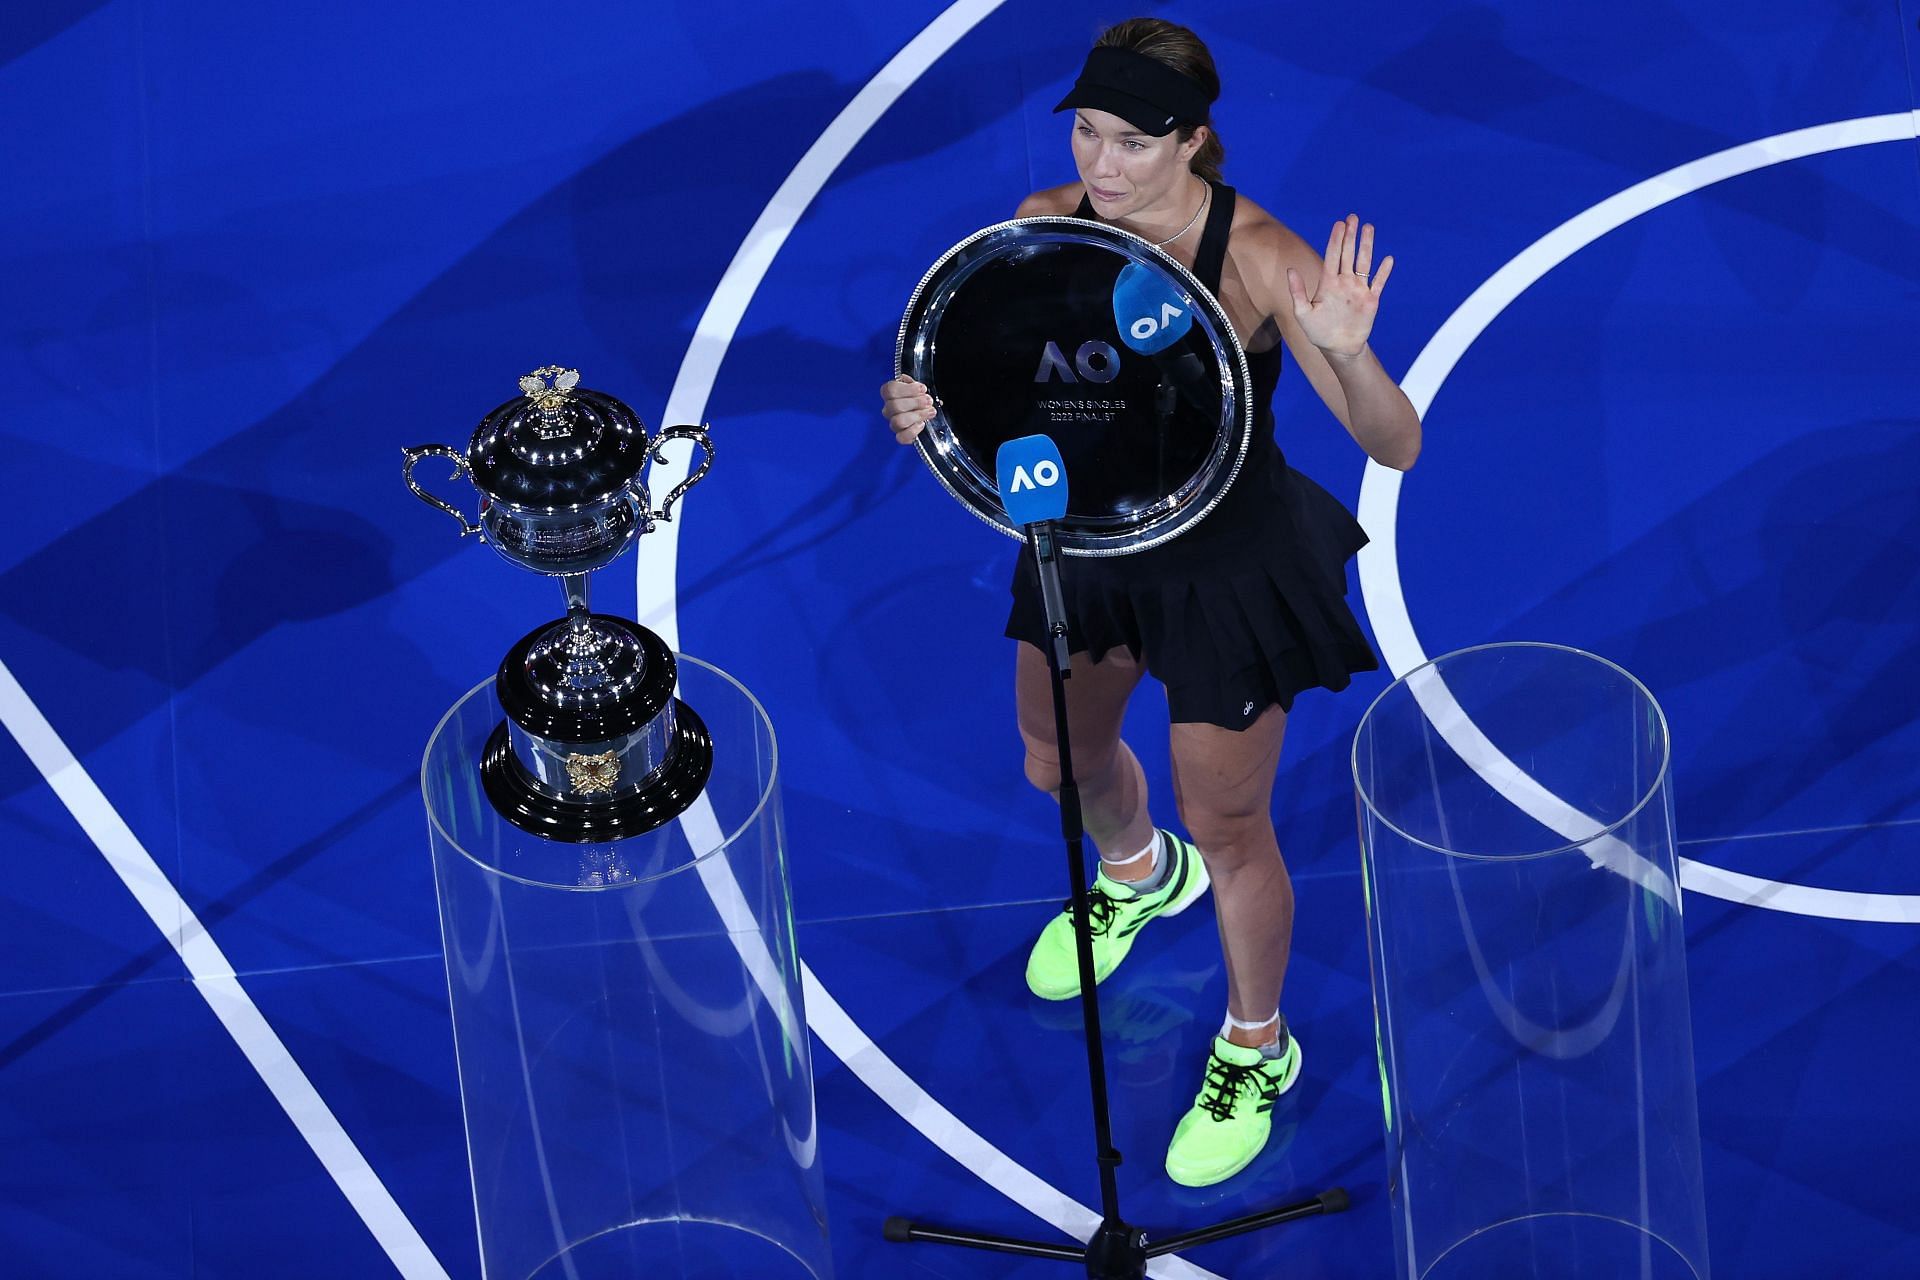 Collins reached her maiden Grand Slam final at the 2022 Australian Open